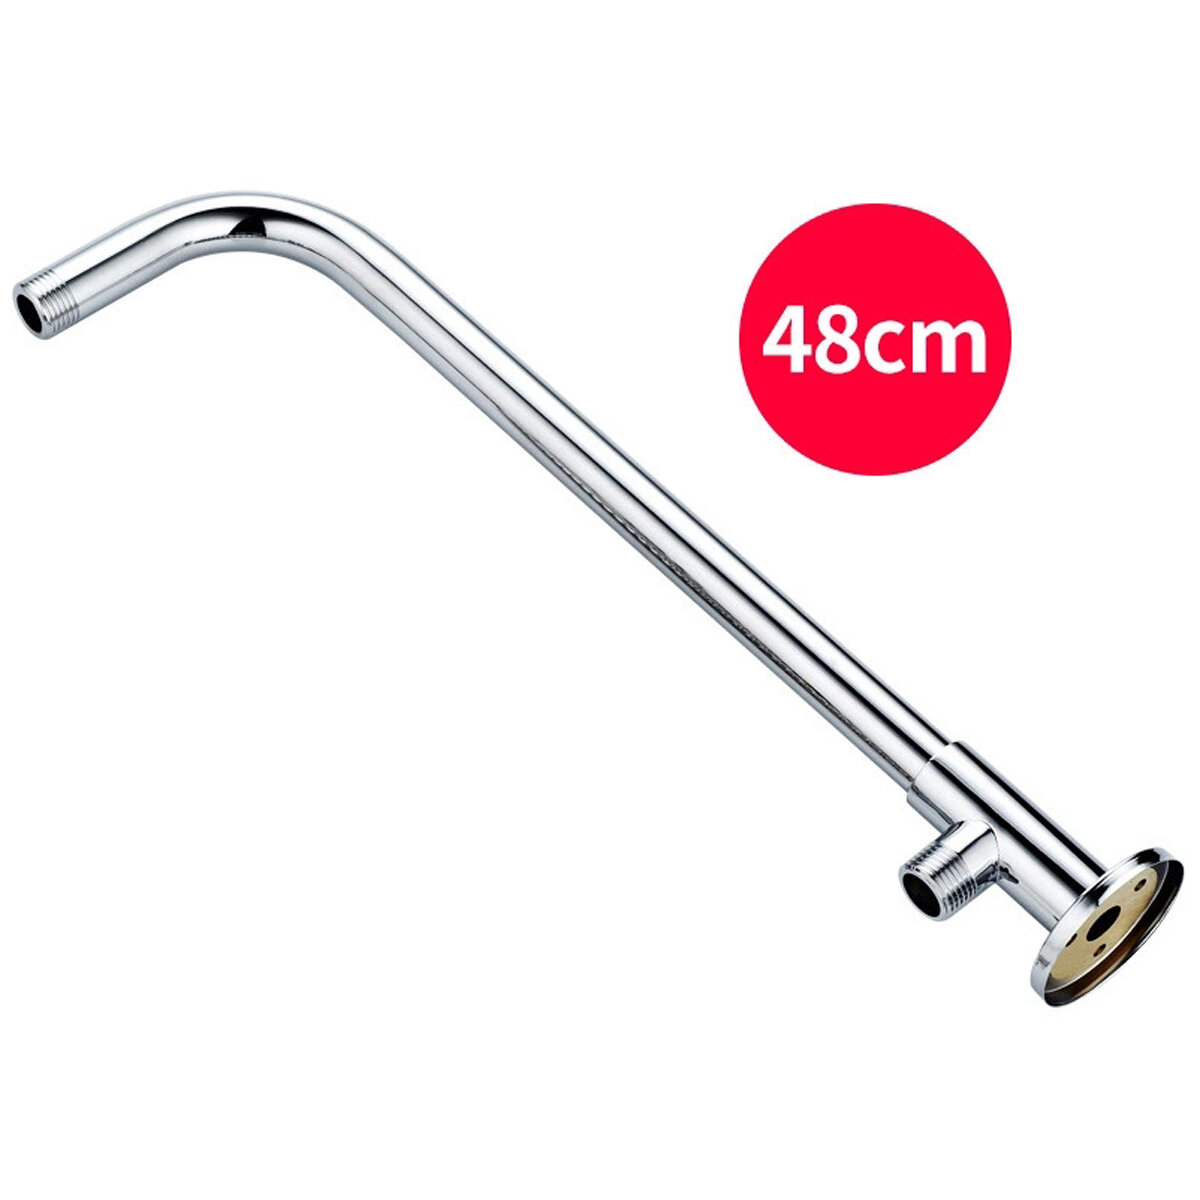 best price,37cm-48cm,rain,shower,head,wall,arm,extension,coupon,price,discount